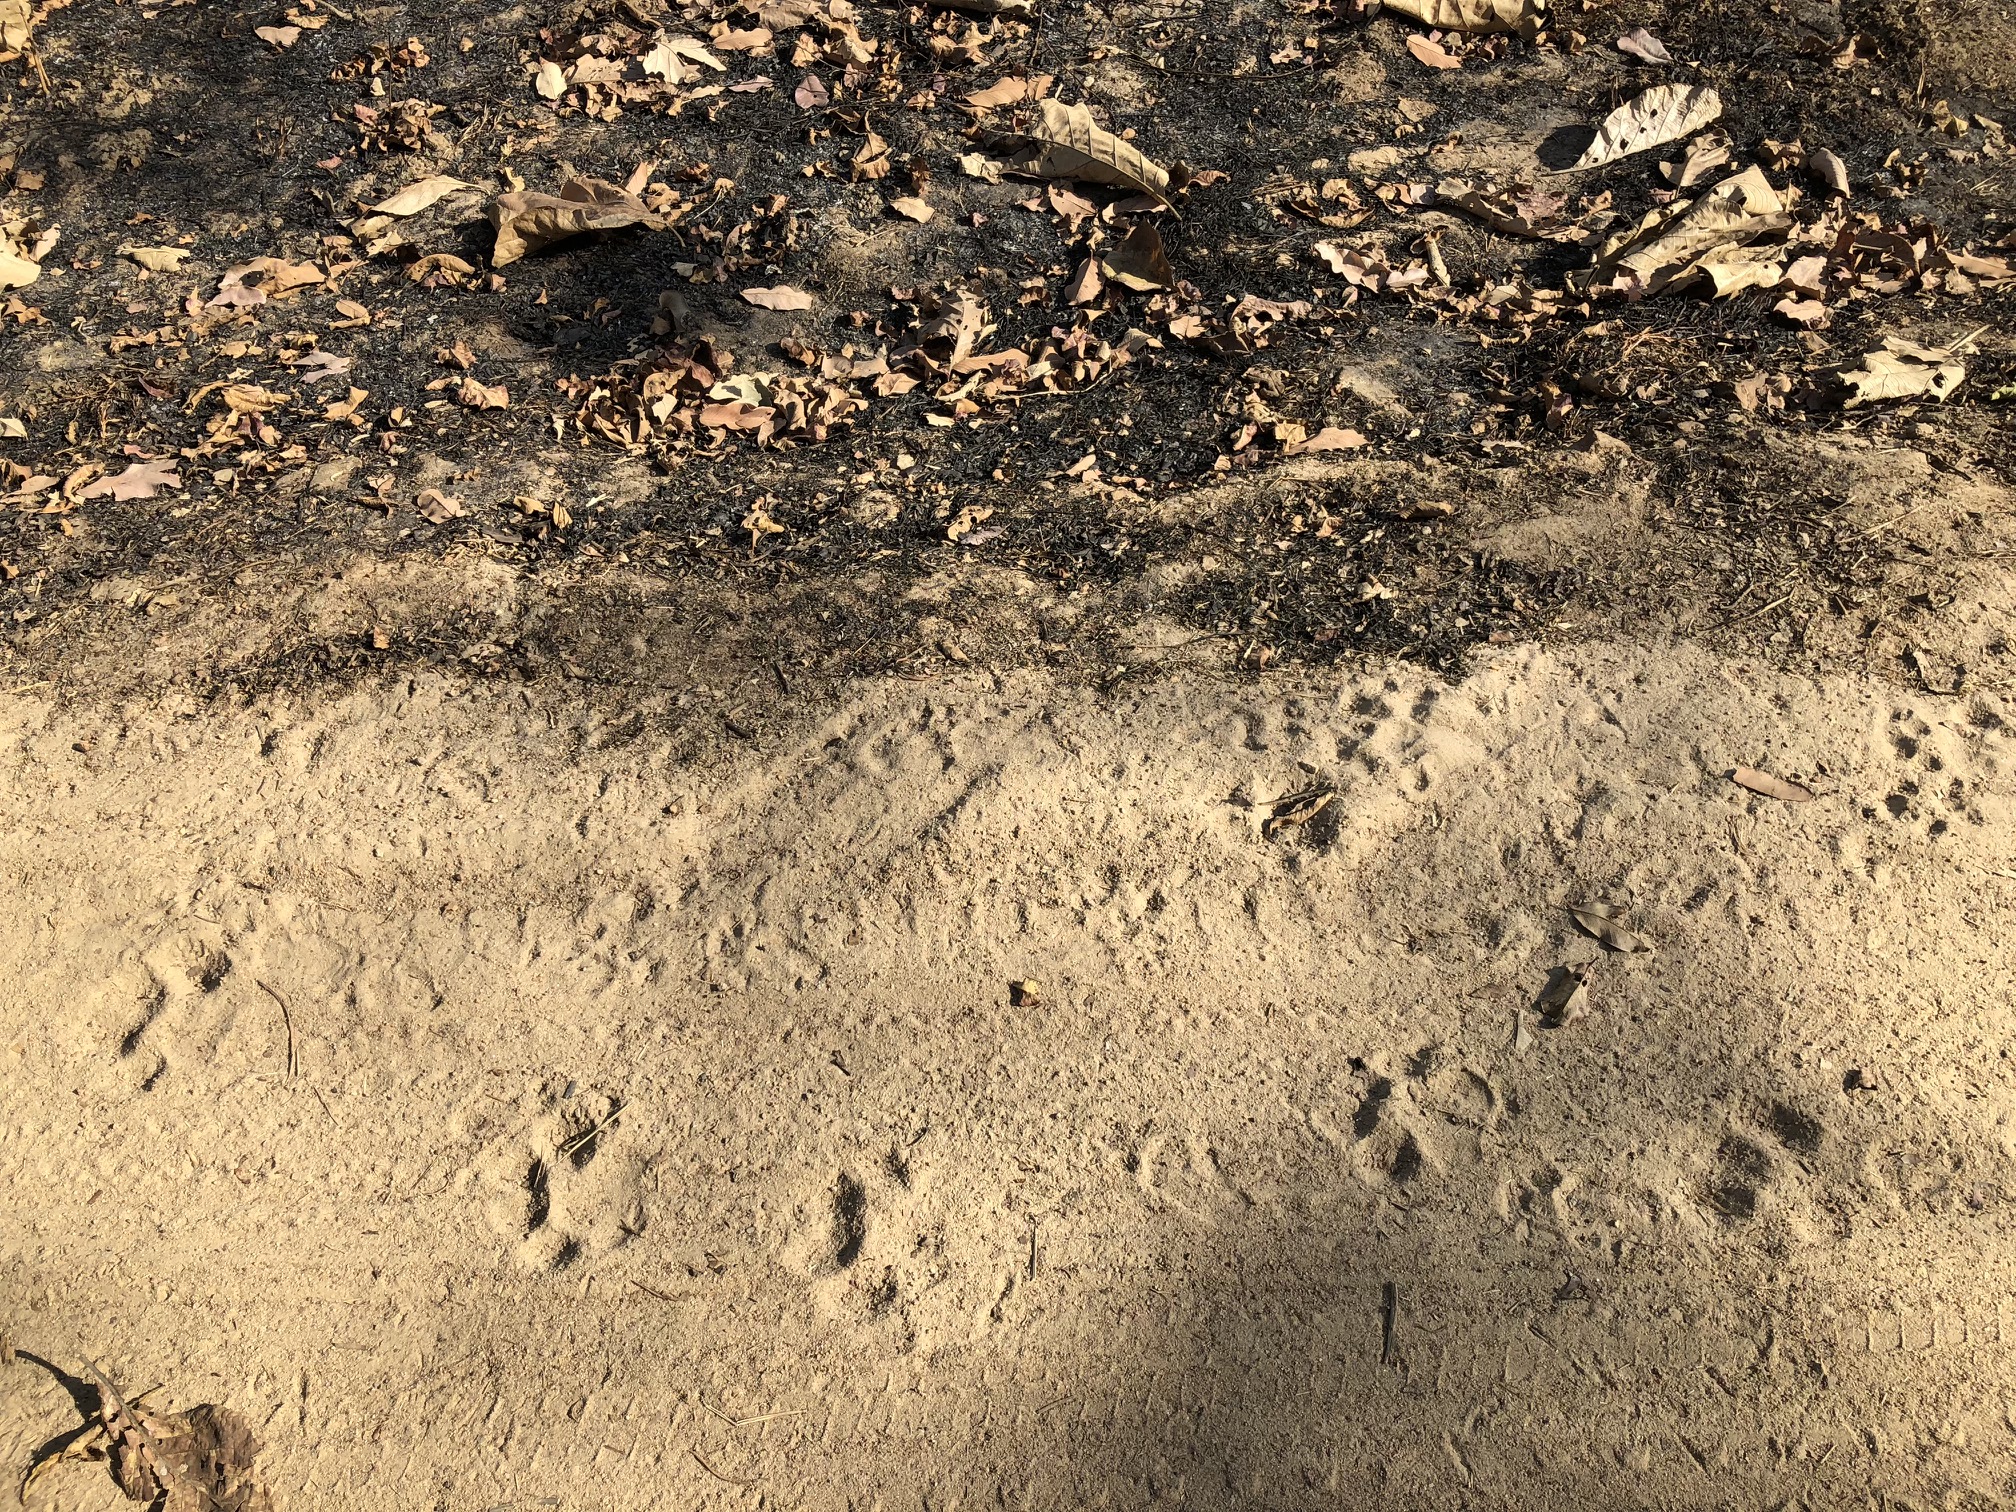 Large paw prints in the dirt of a road indicate a large cat was near recently.